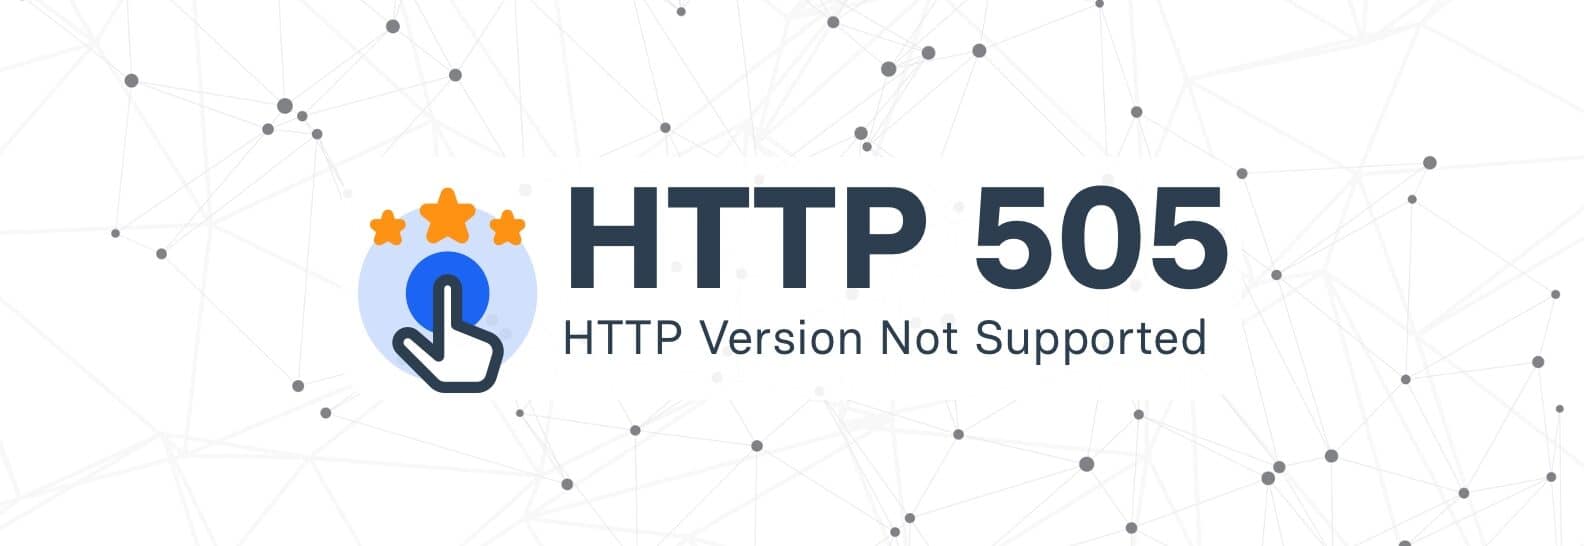 HTTP 505 (HTTP Version Not Supported)